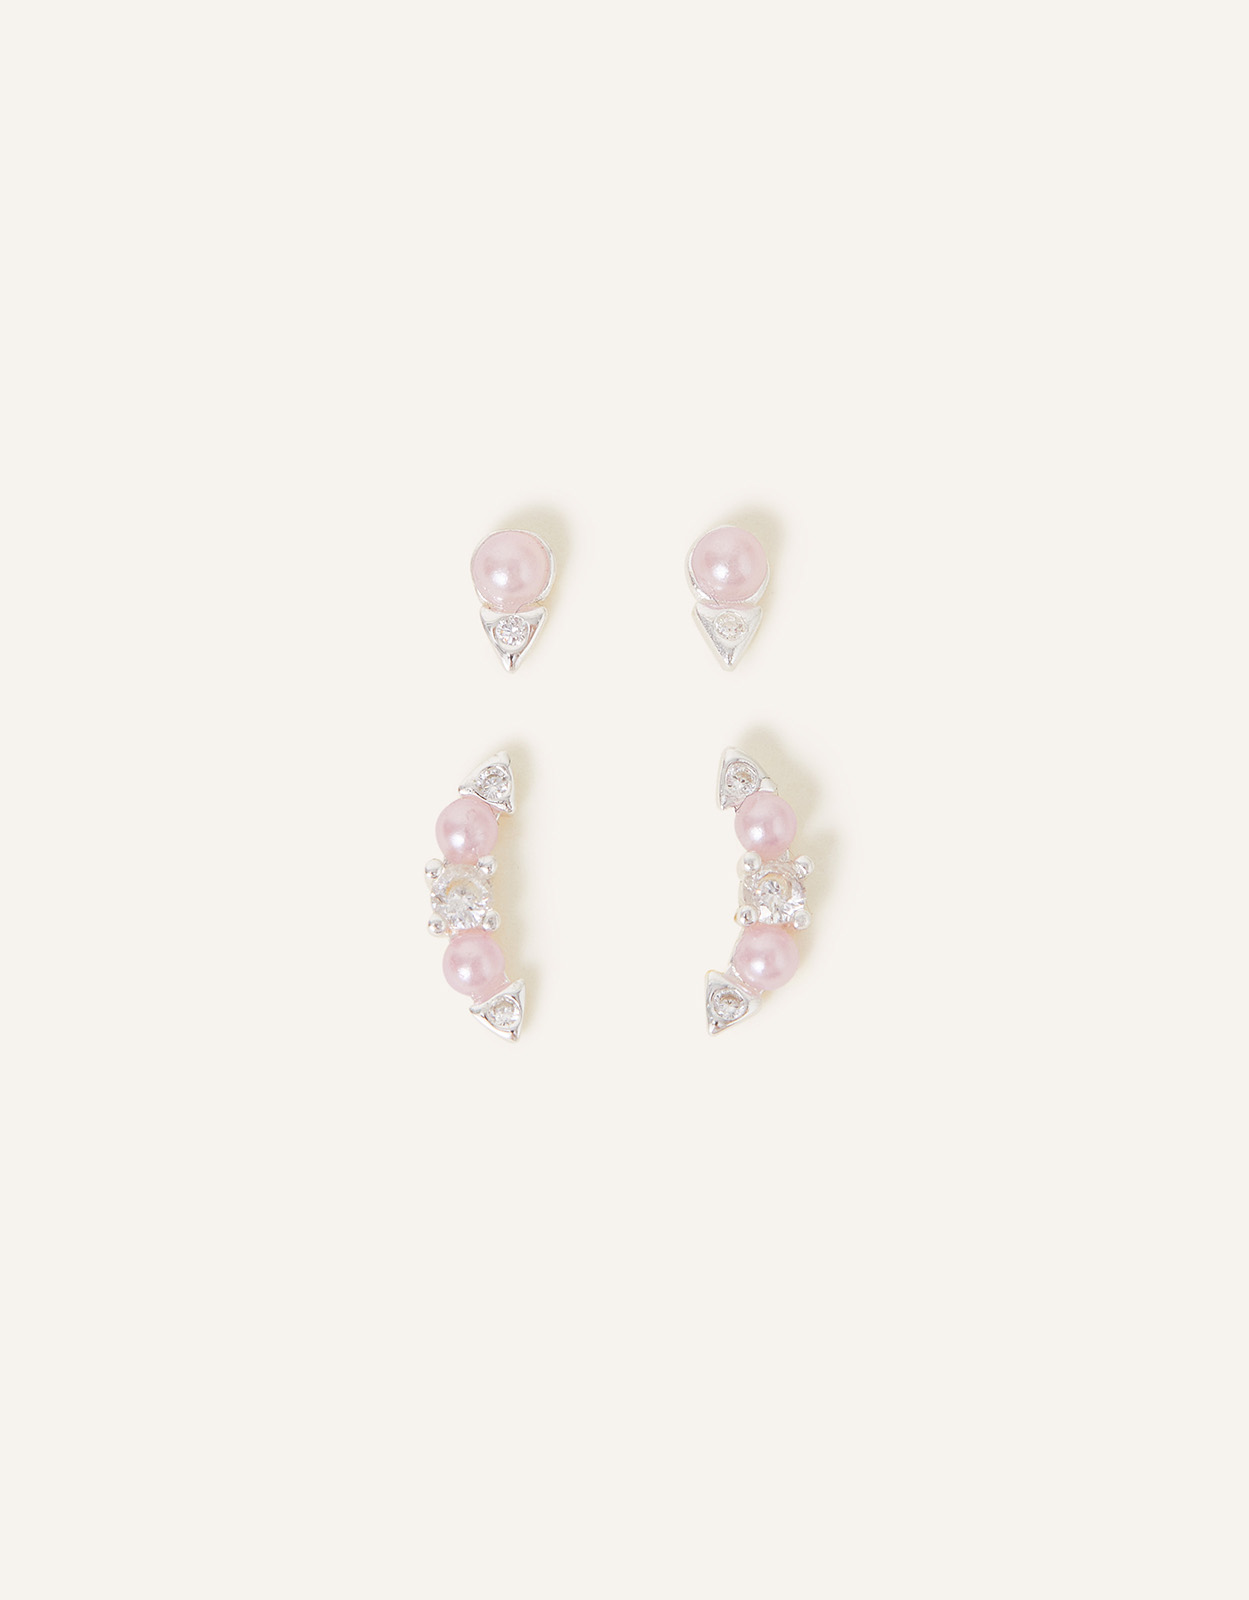 Accessorize Women's Pink and Silver Set of Two Beaded Sparkle Earrings, Size: 1cm